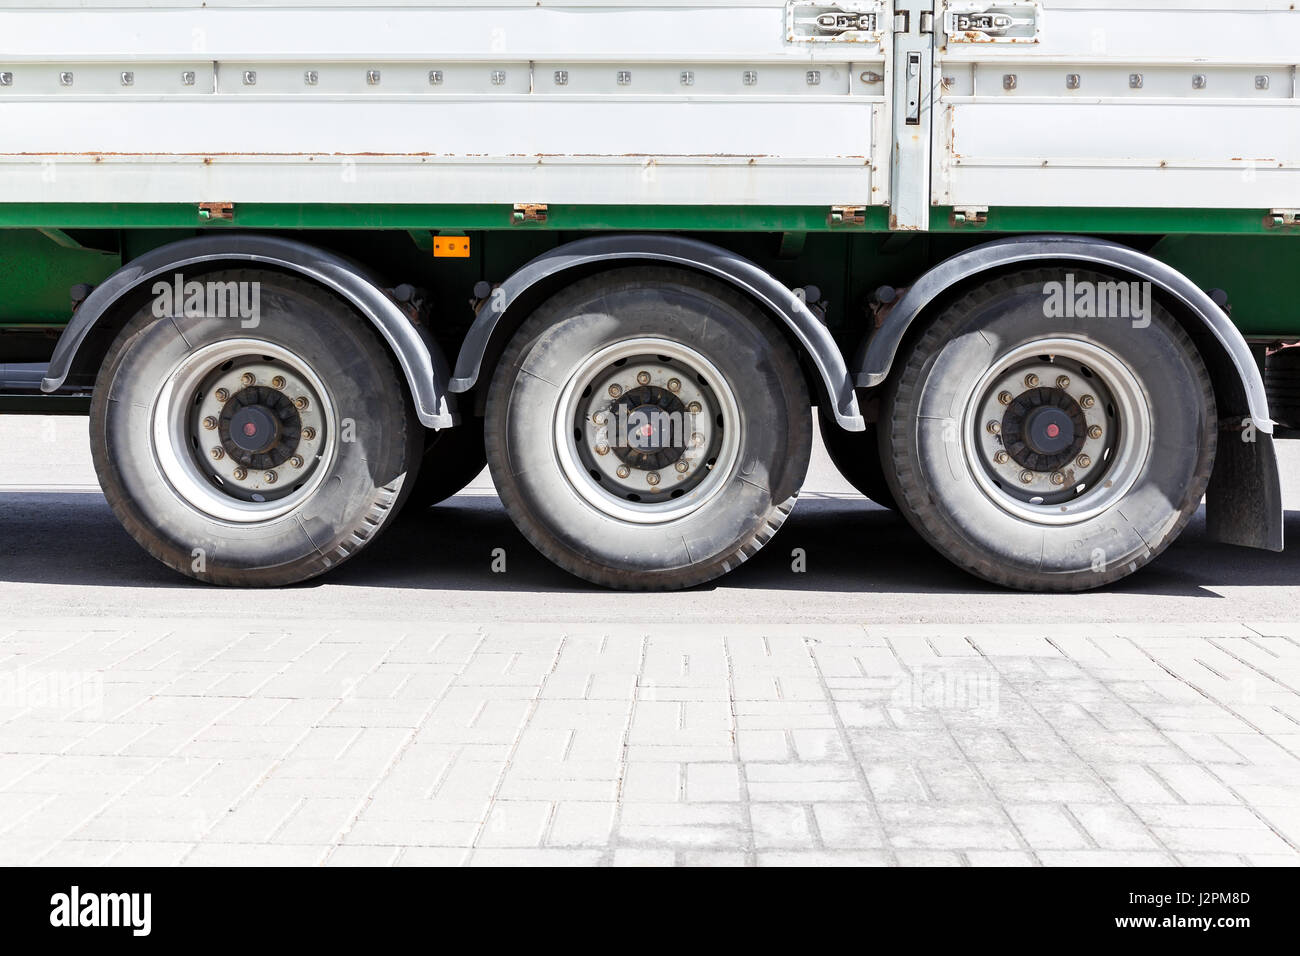 wheels of large truck and trailers at parking lot closeup view Stock Photo